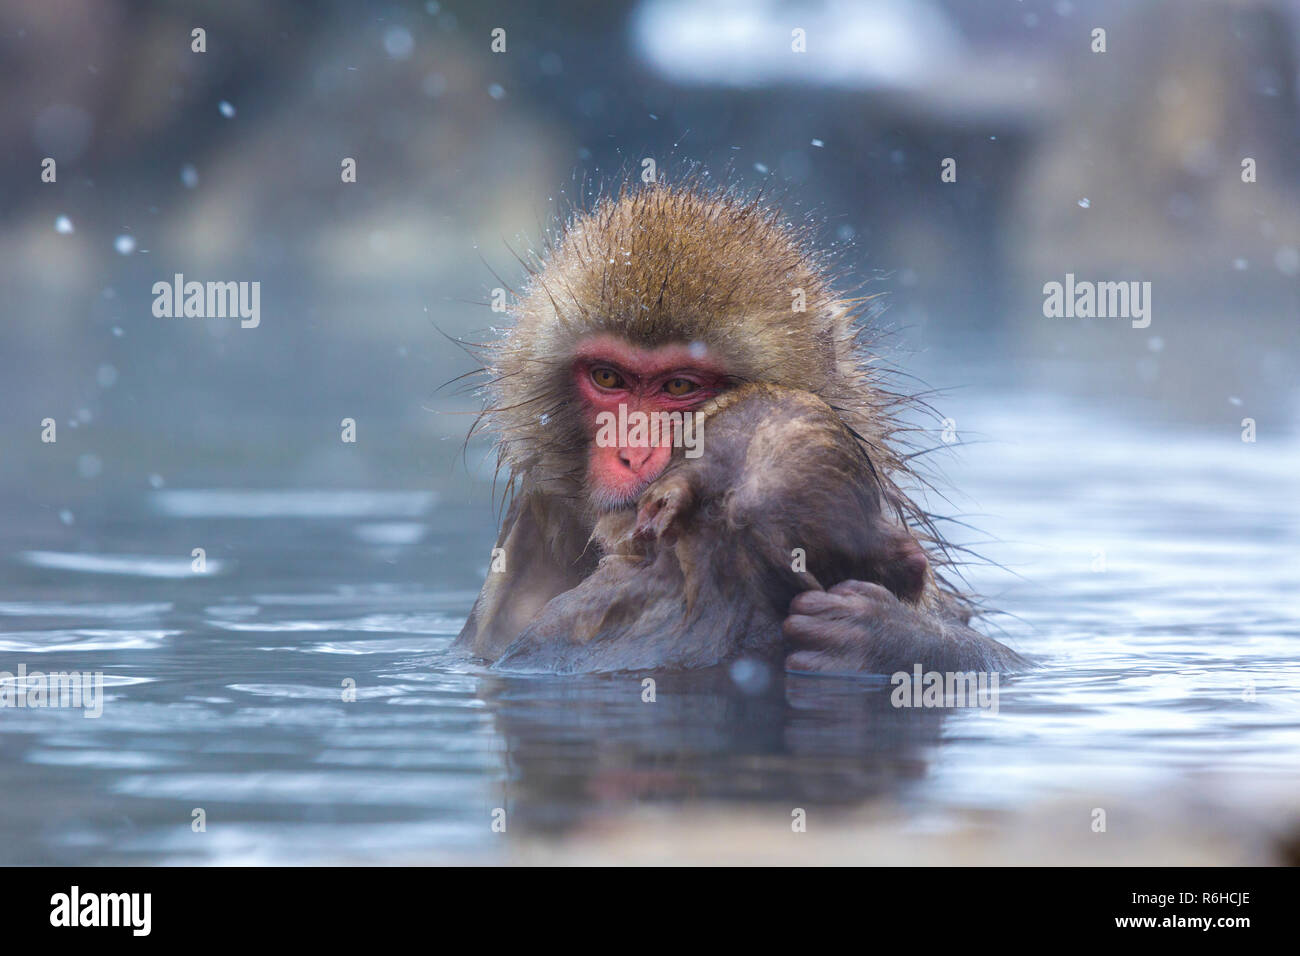 Snow Monkey or Japanese macaque Mom and baby during winter in Nagano Japan Stock Photo